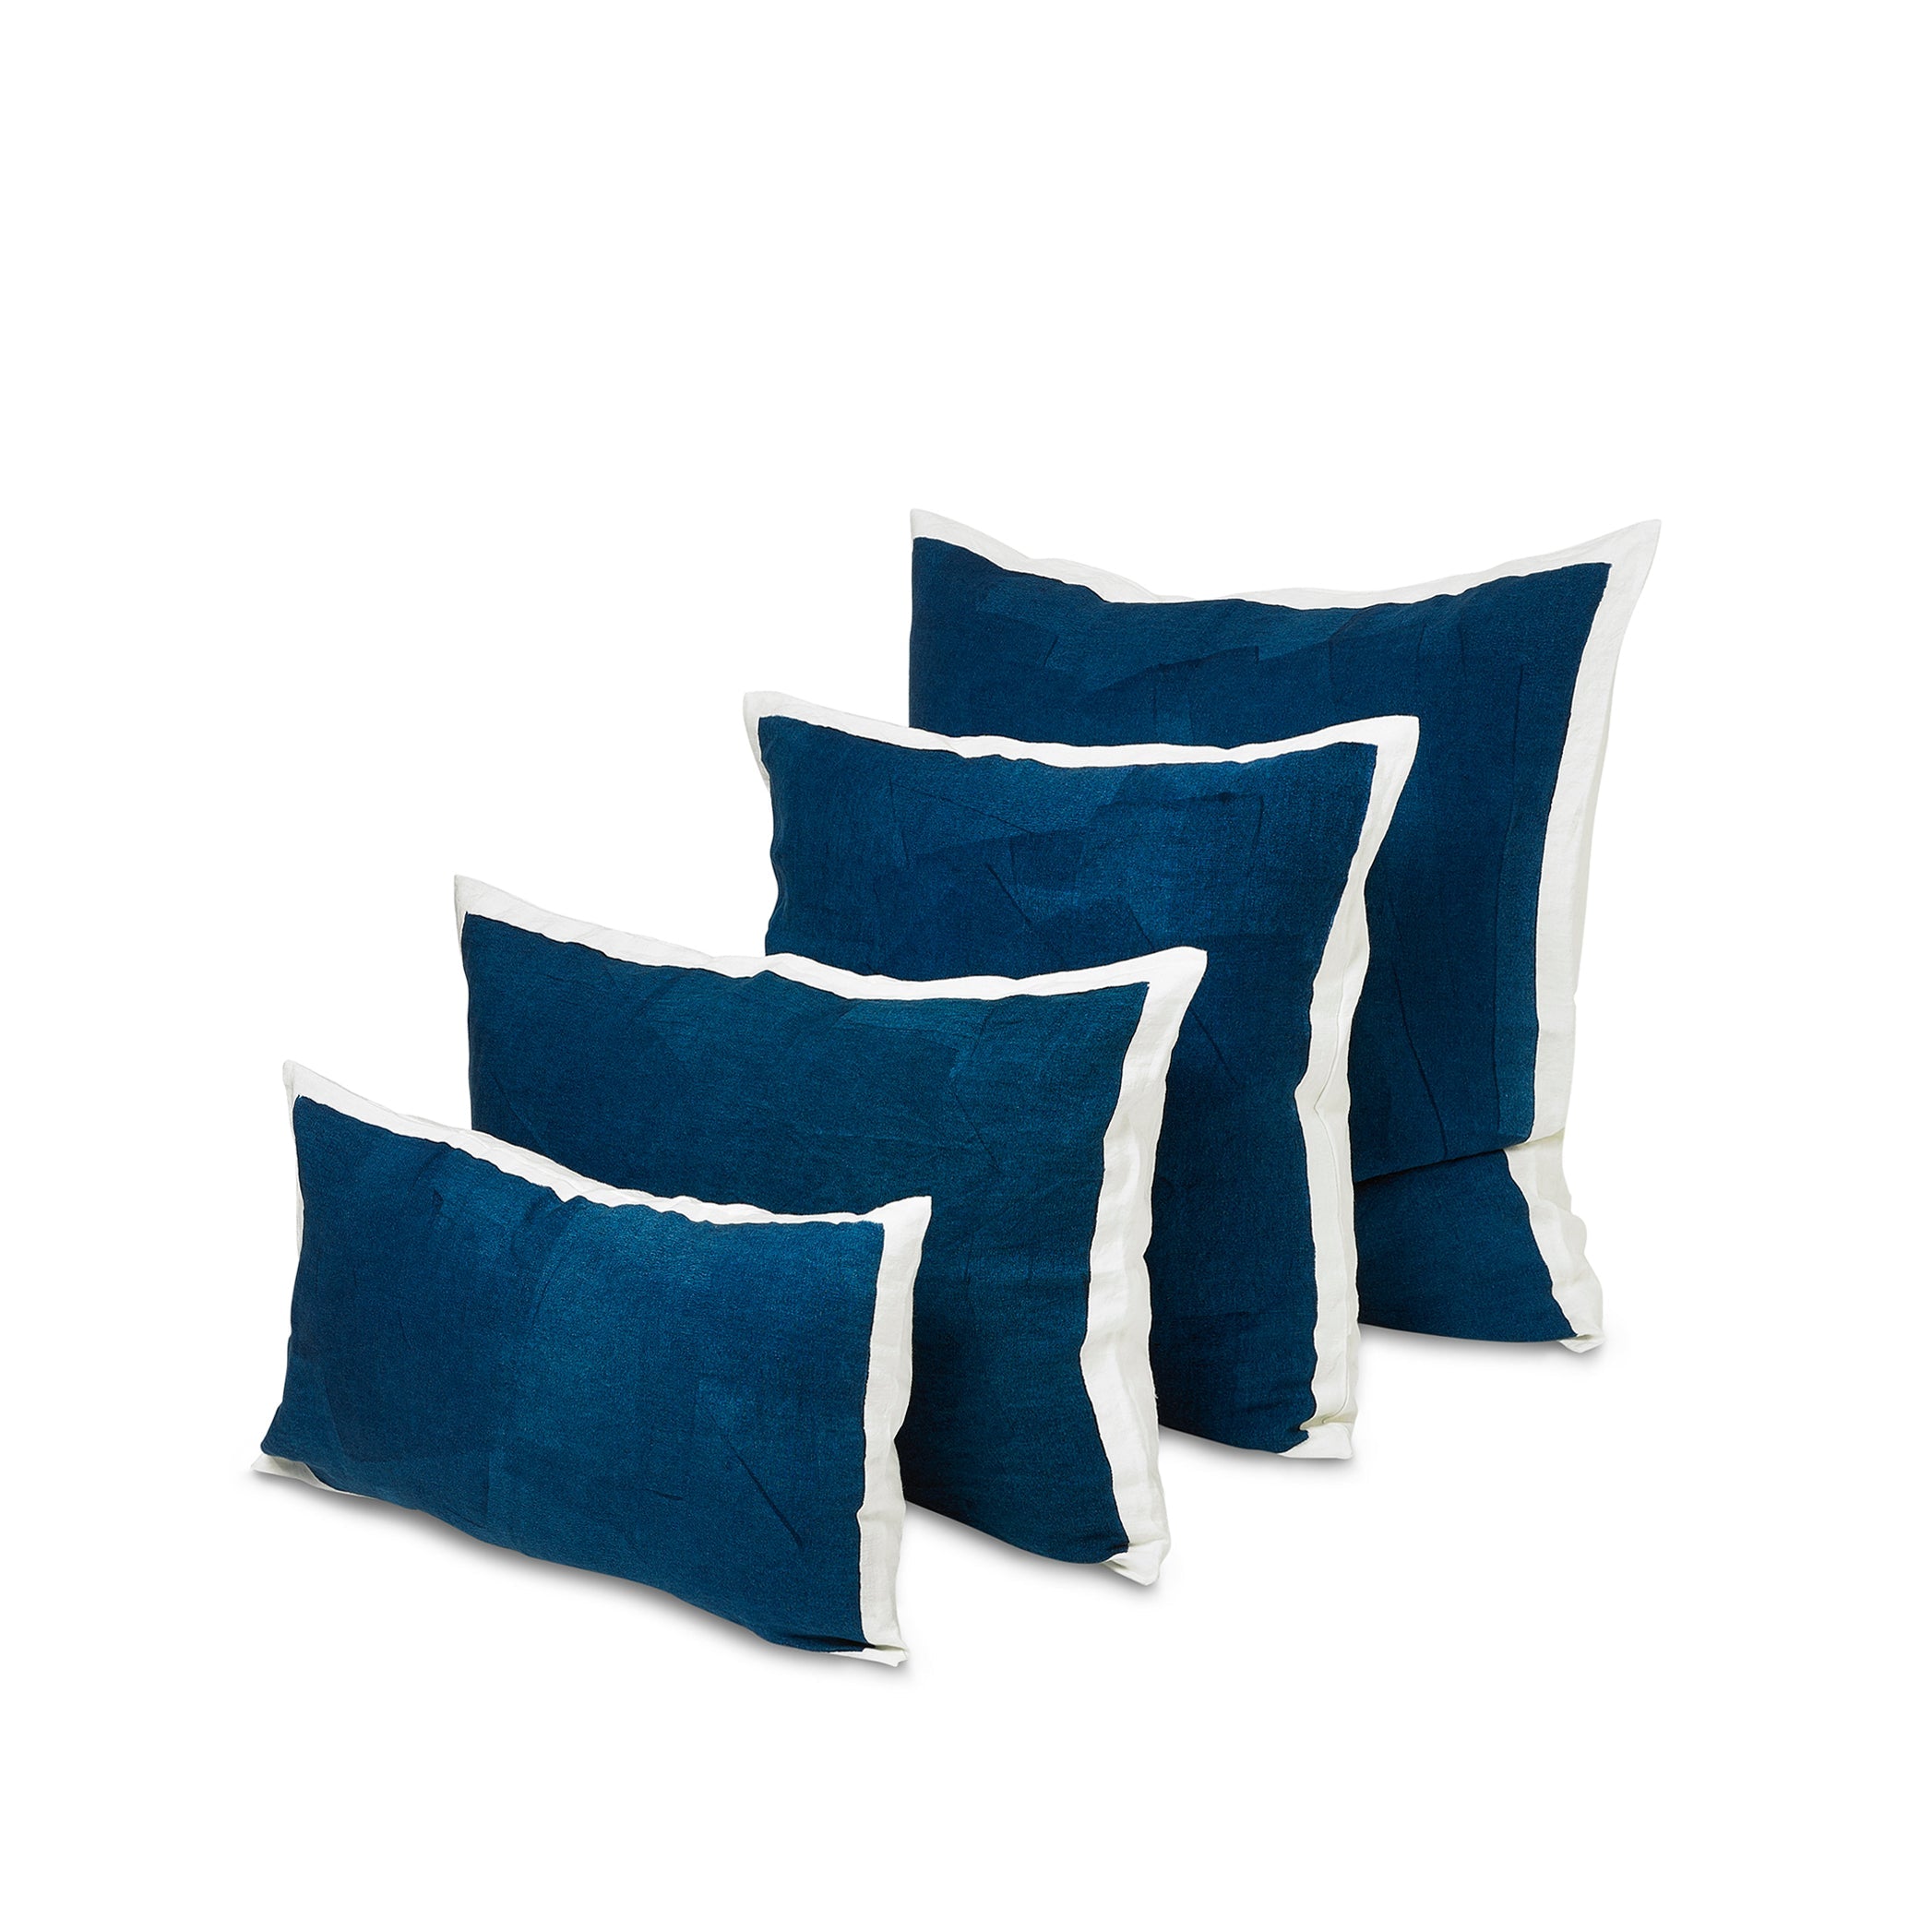 Hand Painted Linen Cushion in Midnight Blue, 50cm x 30cm